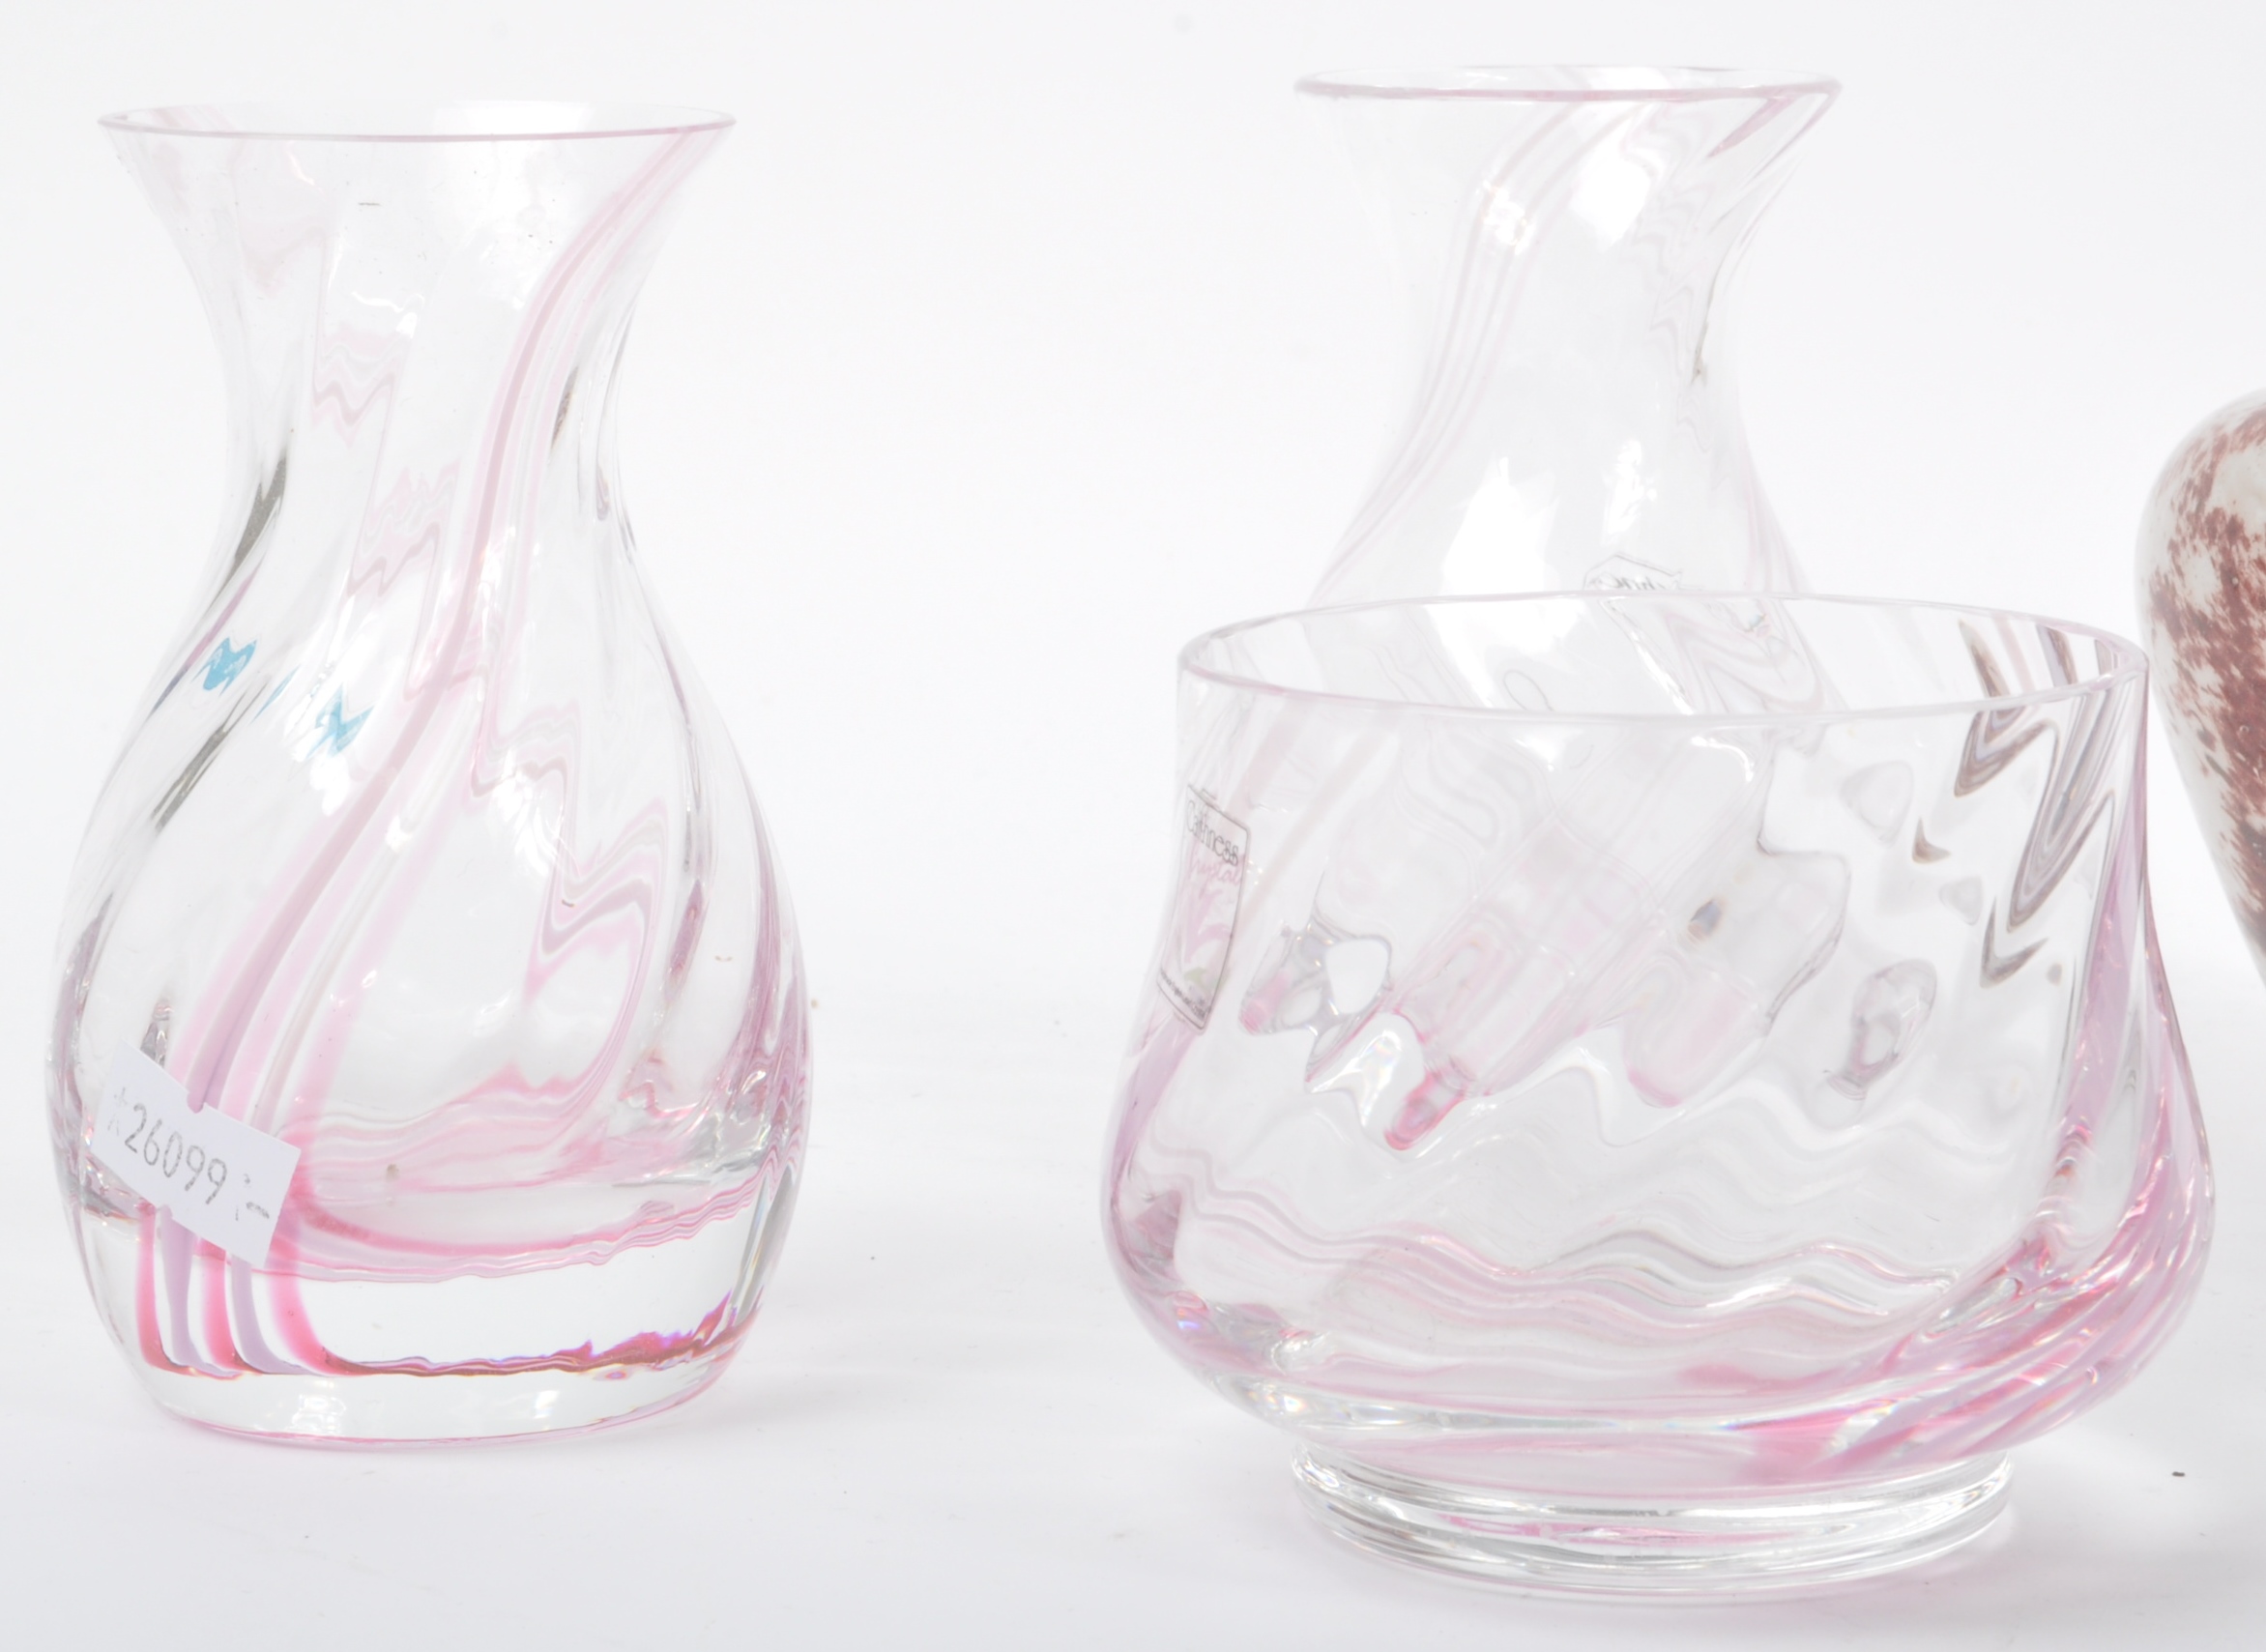 COLLECTION OF LATE 20TH CENTURY STUDIO ART GLASS - Image 2 of 5